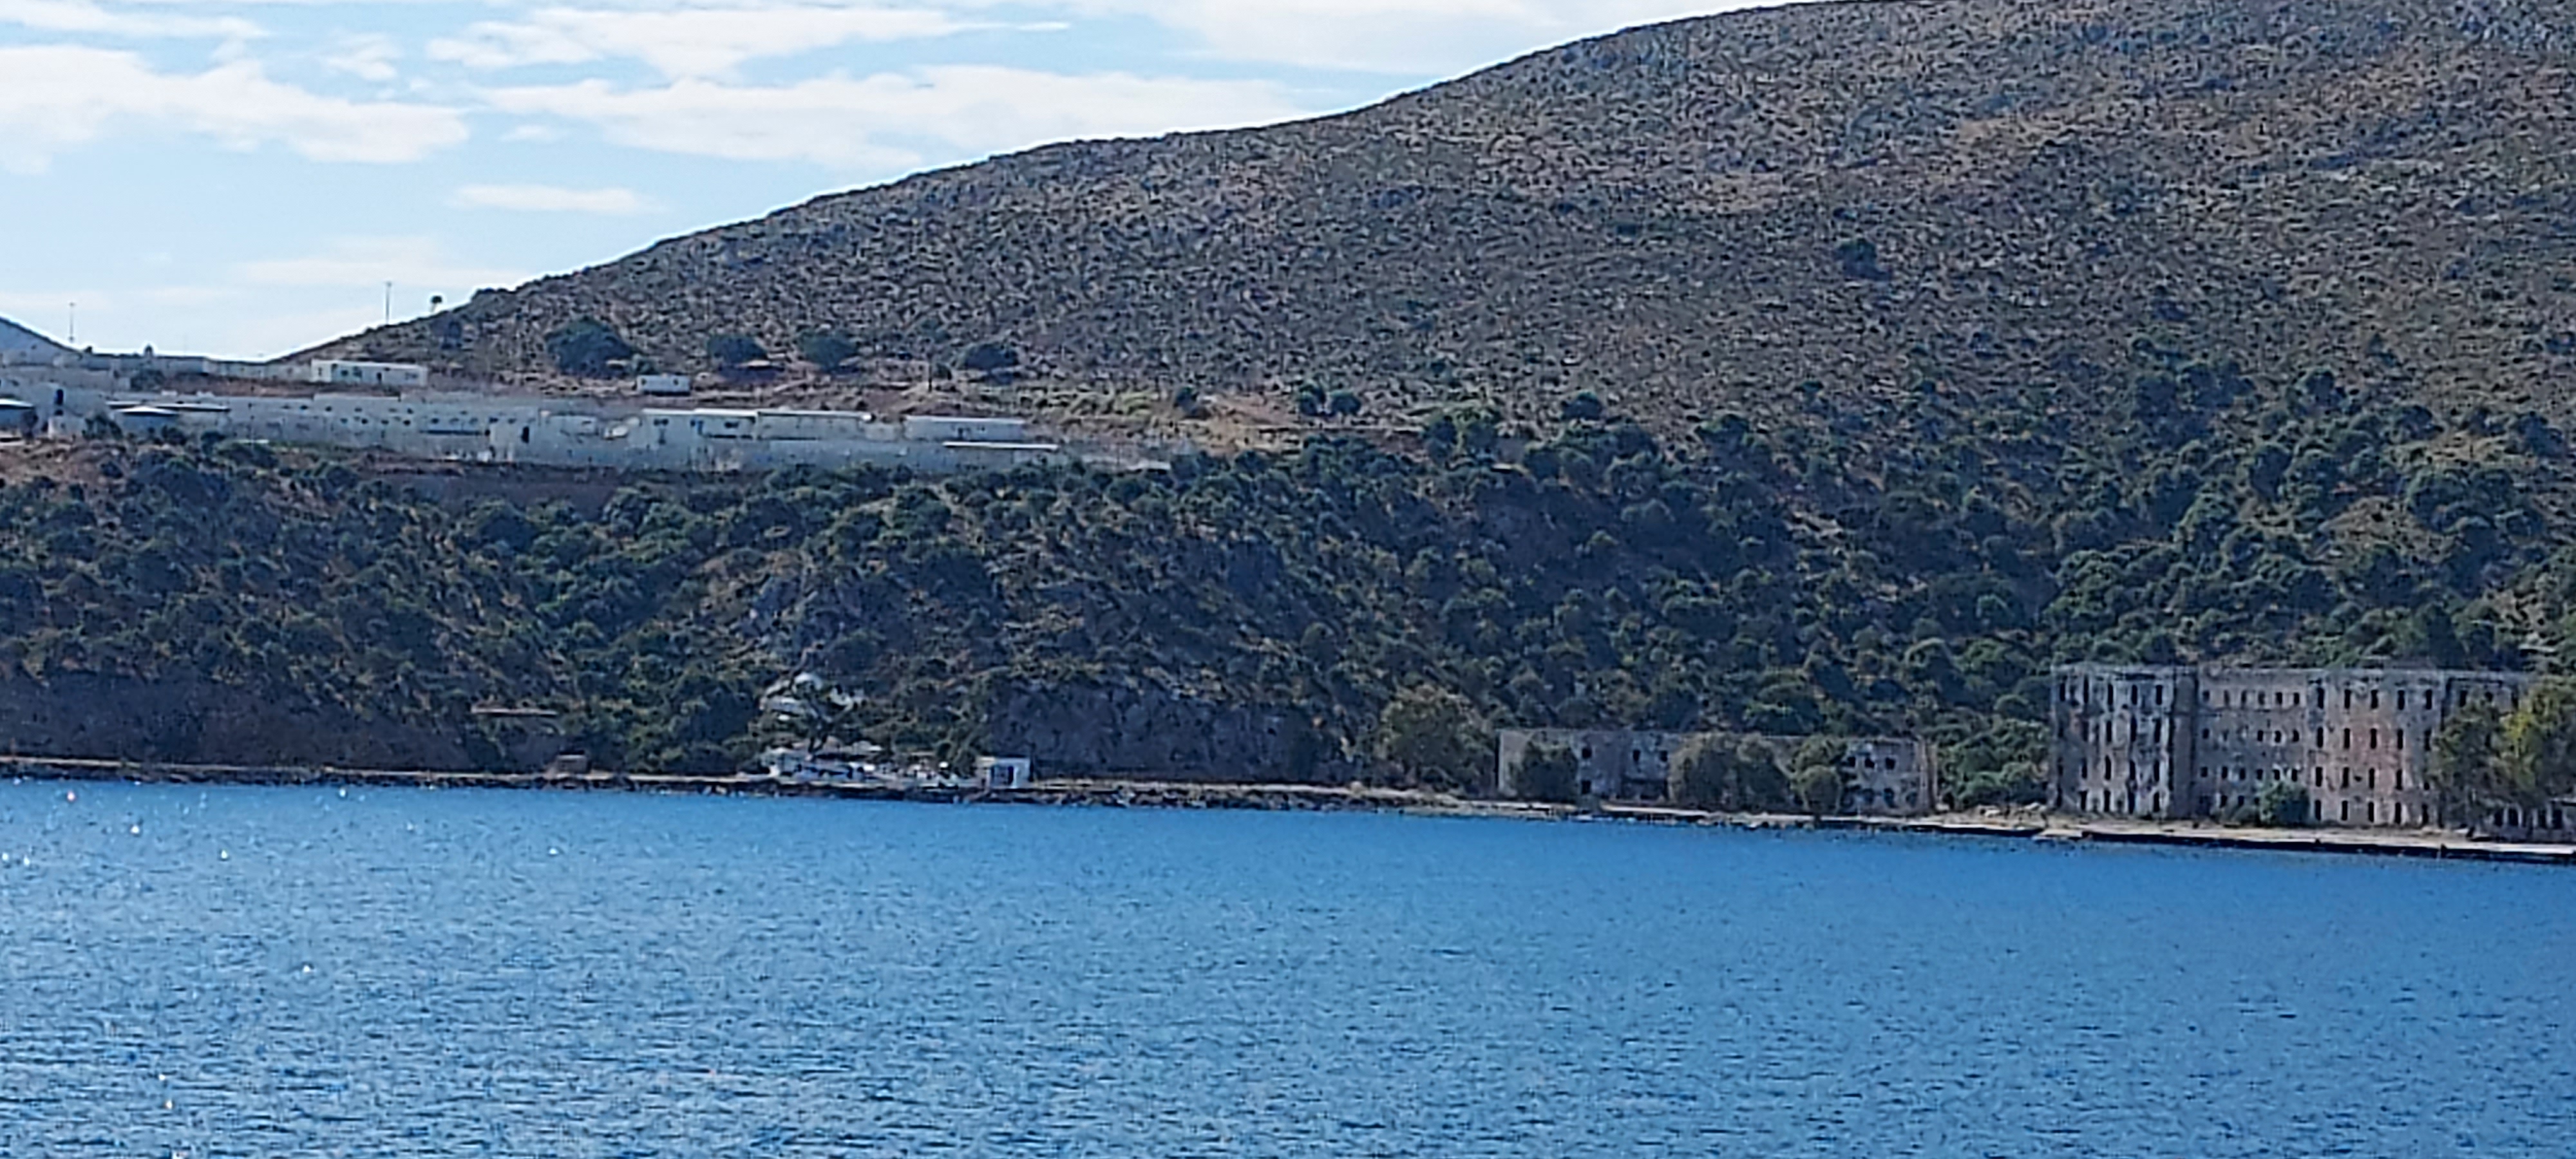 FRONTEX hotspot and old prison building Leros